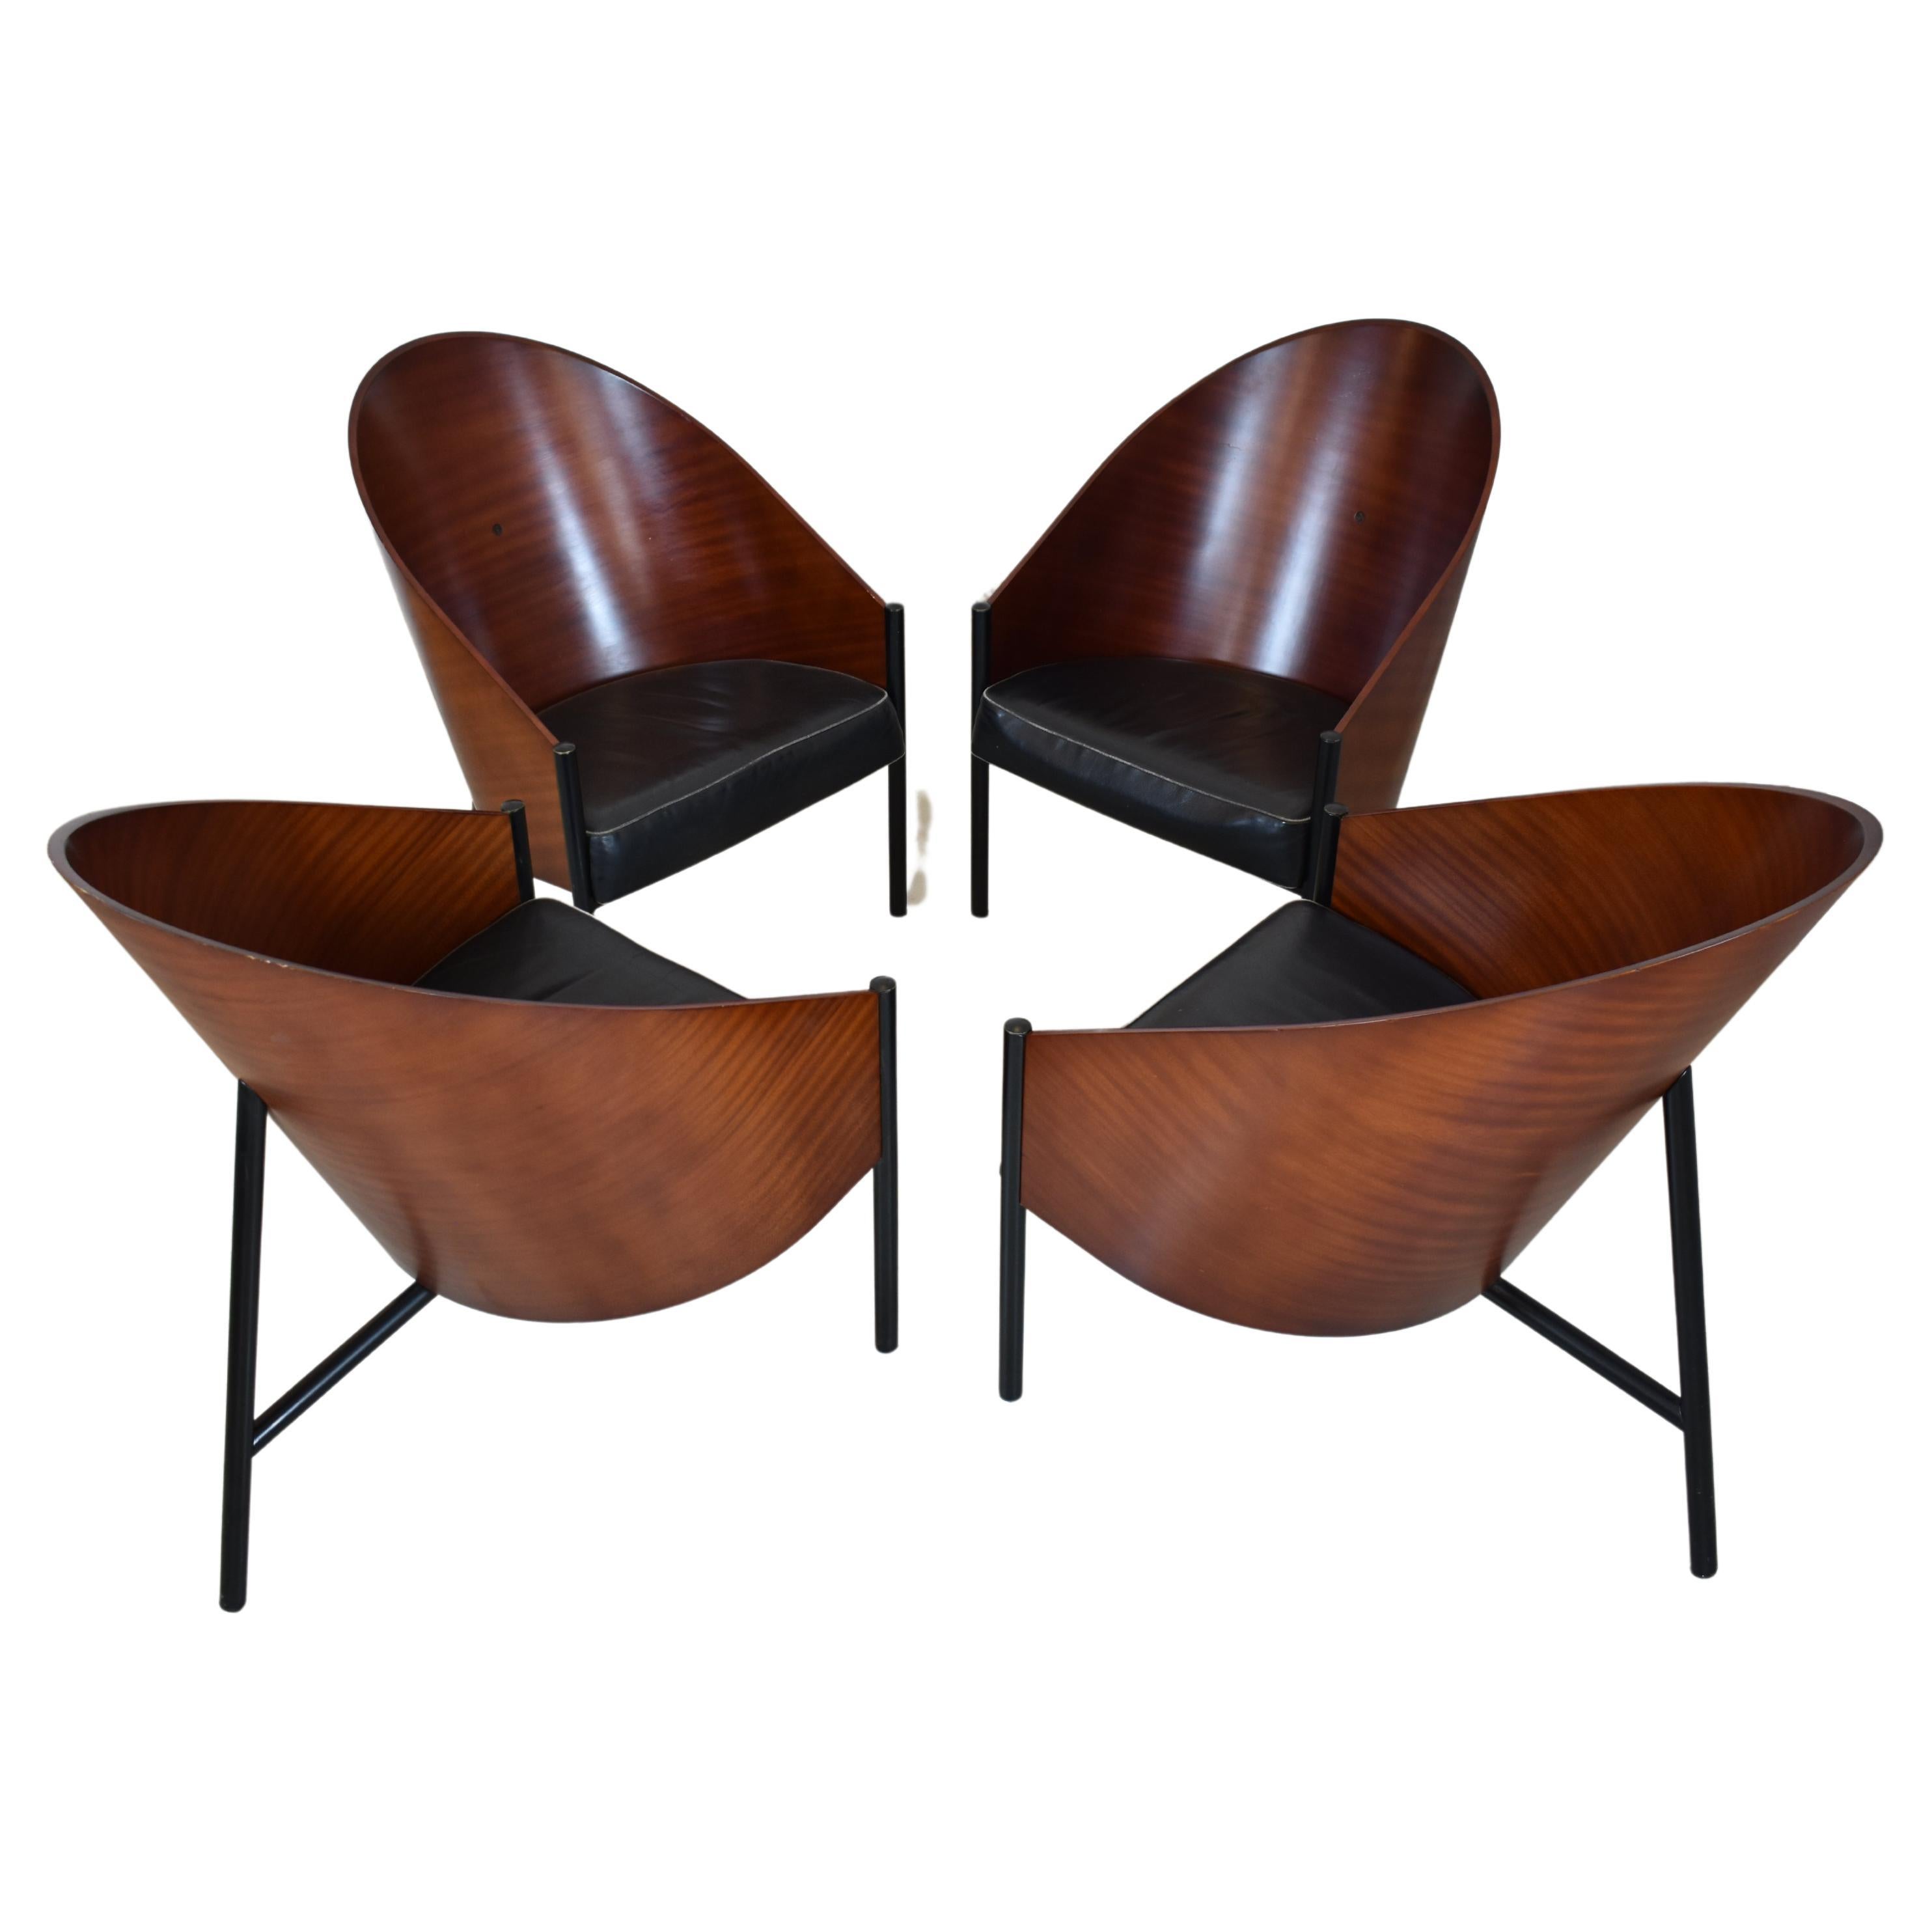 Set of Four Philippe Starck Armchairs, 1st Ed., Pratfall for Driade, Italy, 1984 For Sale